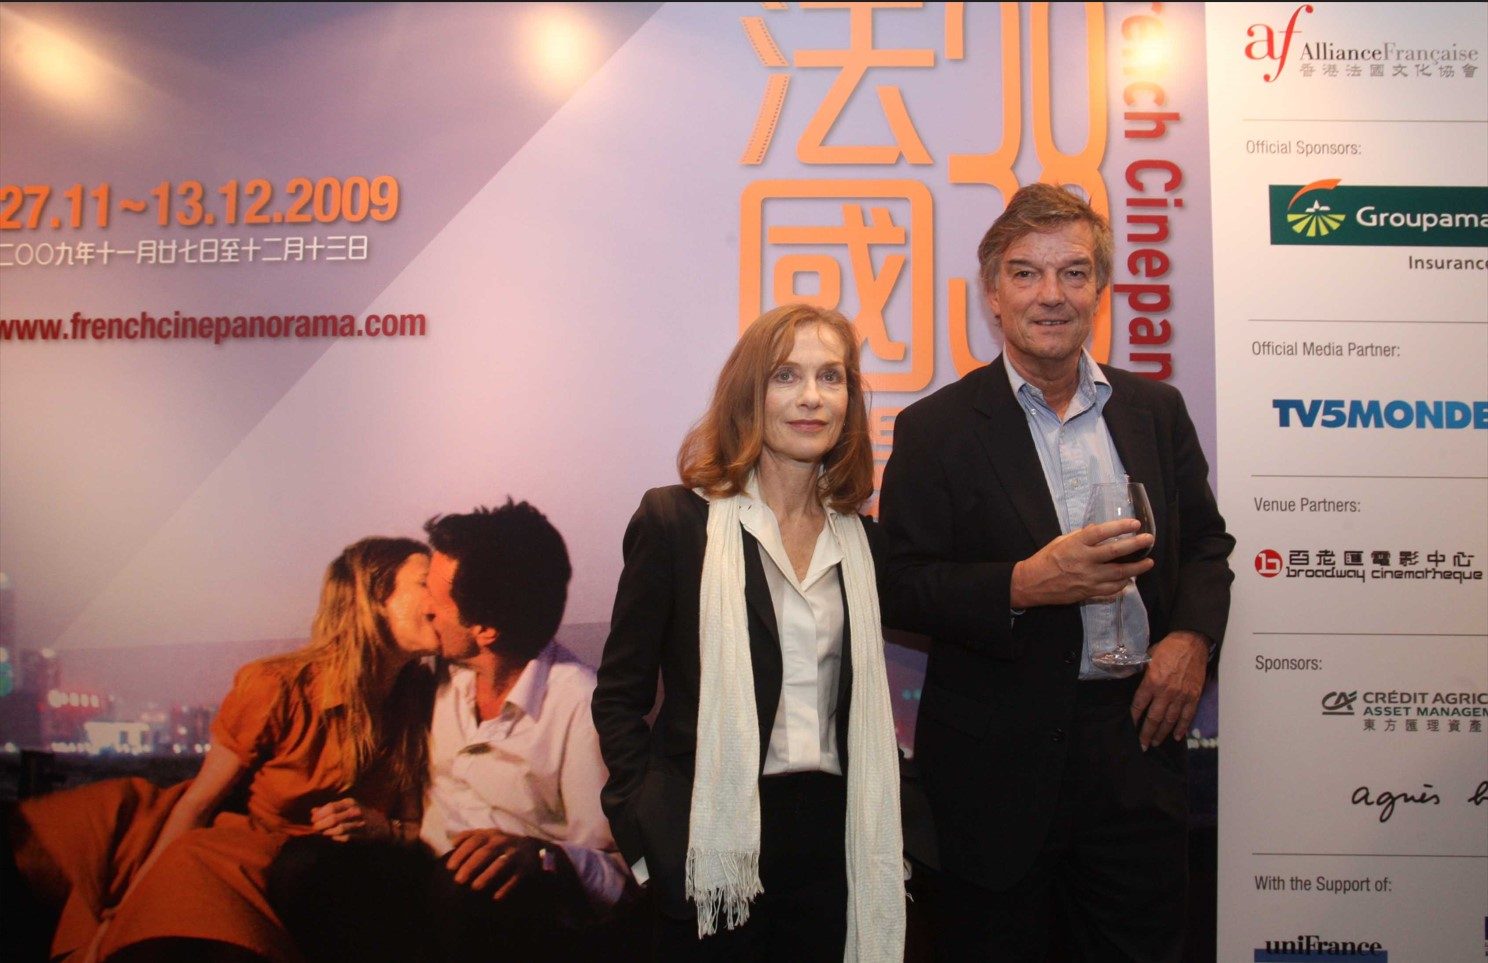 French actor and actress Benoit Jacquot and Isabelle Huppert to whom the Festival was paying a tribute through a retrospective in the 39th edition of the Festival in 2009.